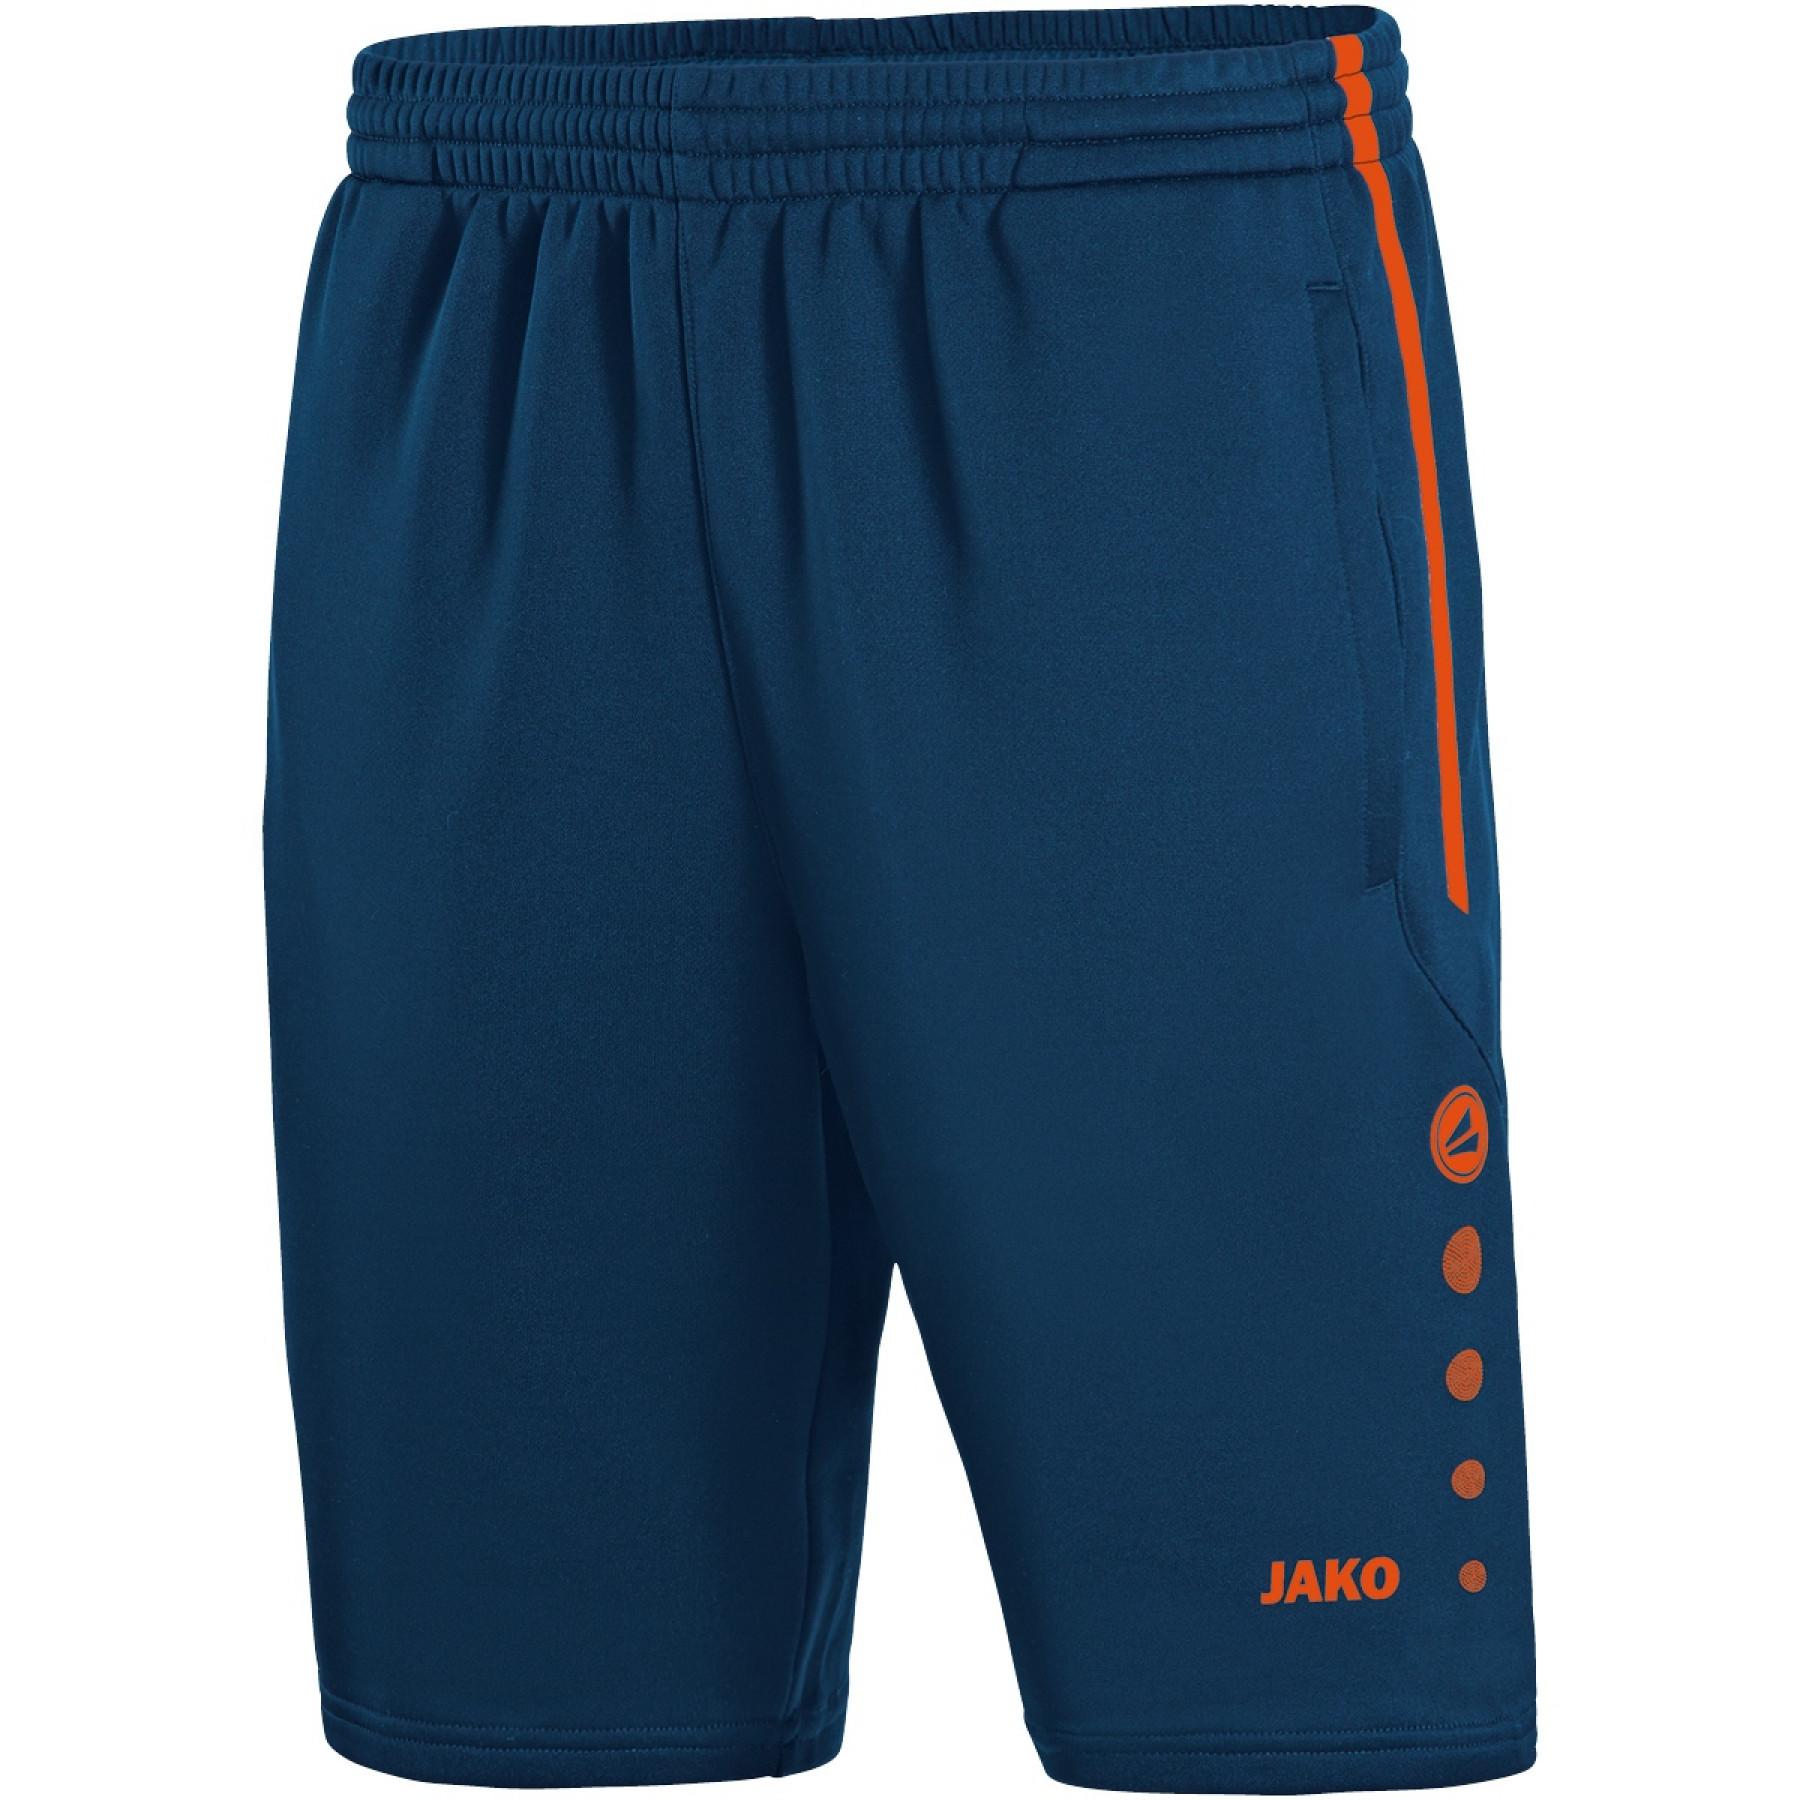 Active training shorts for kids